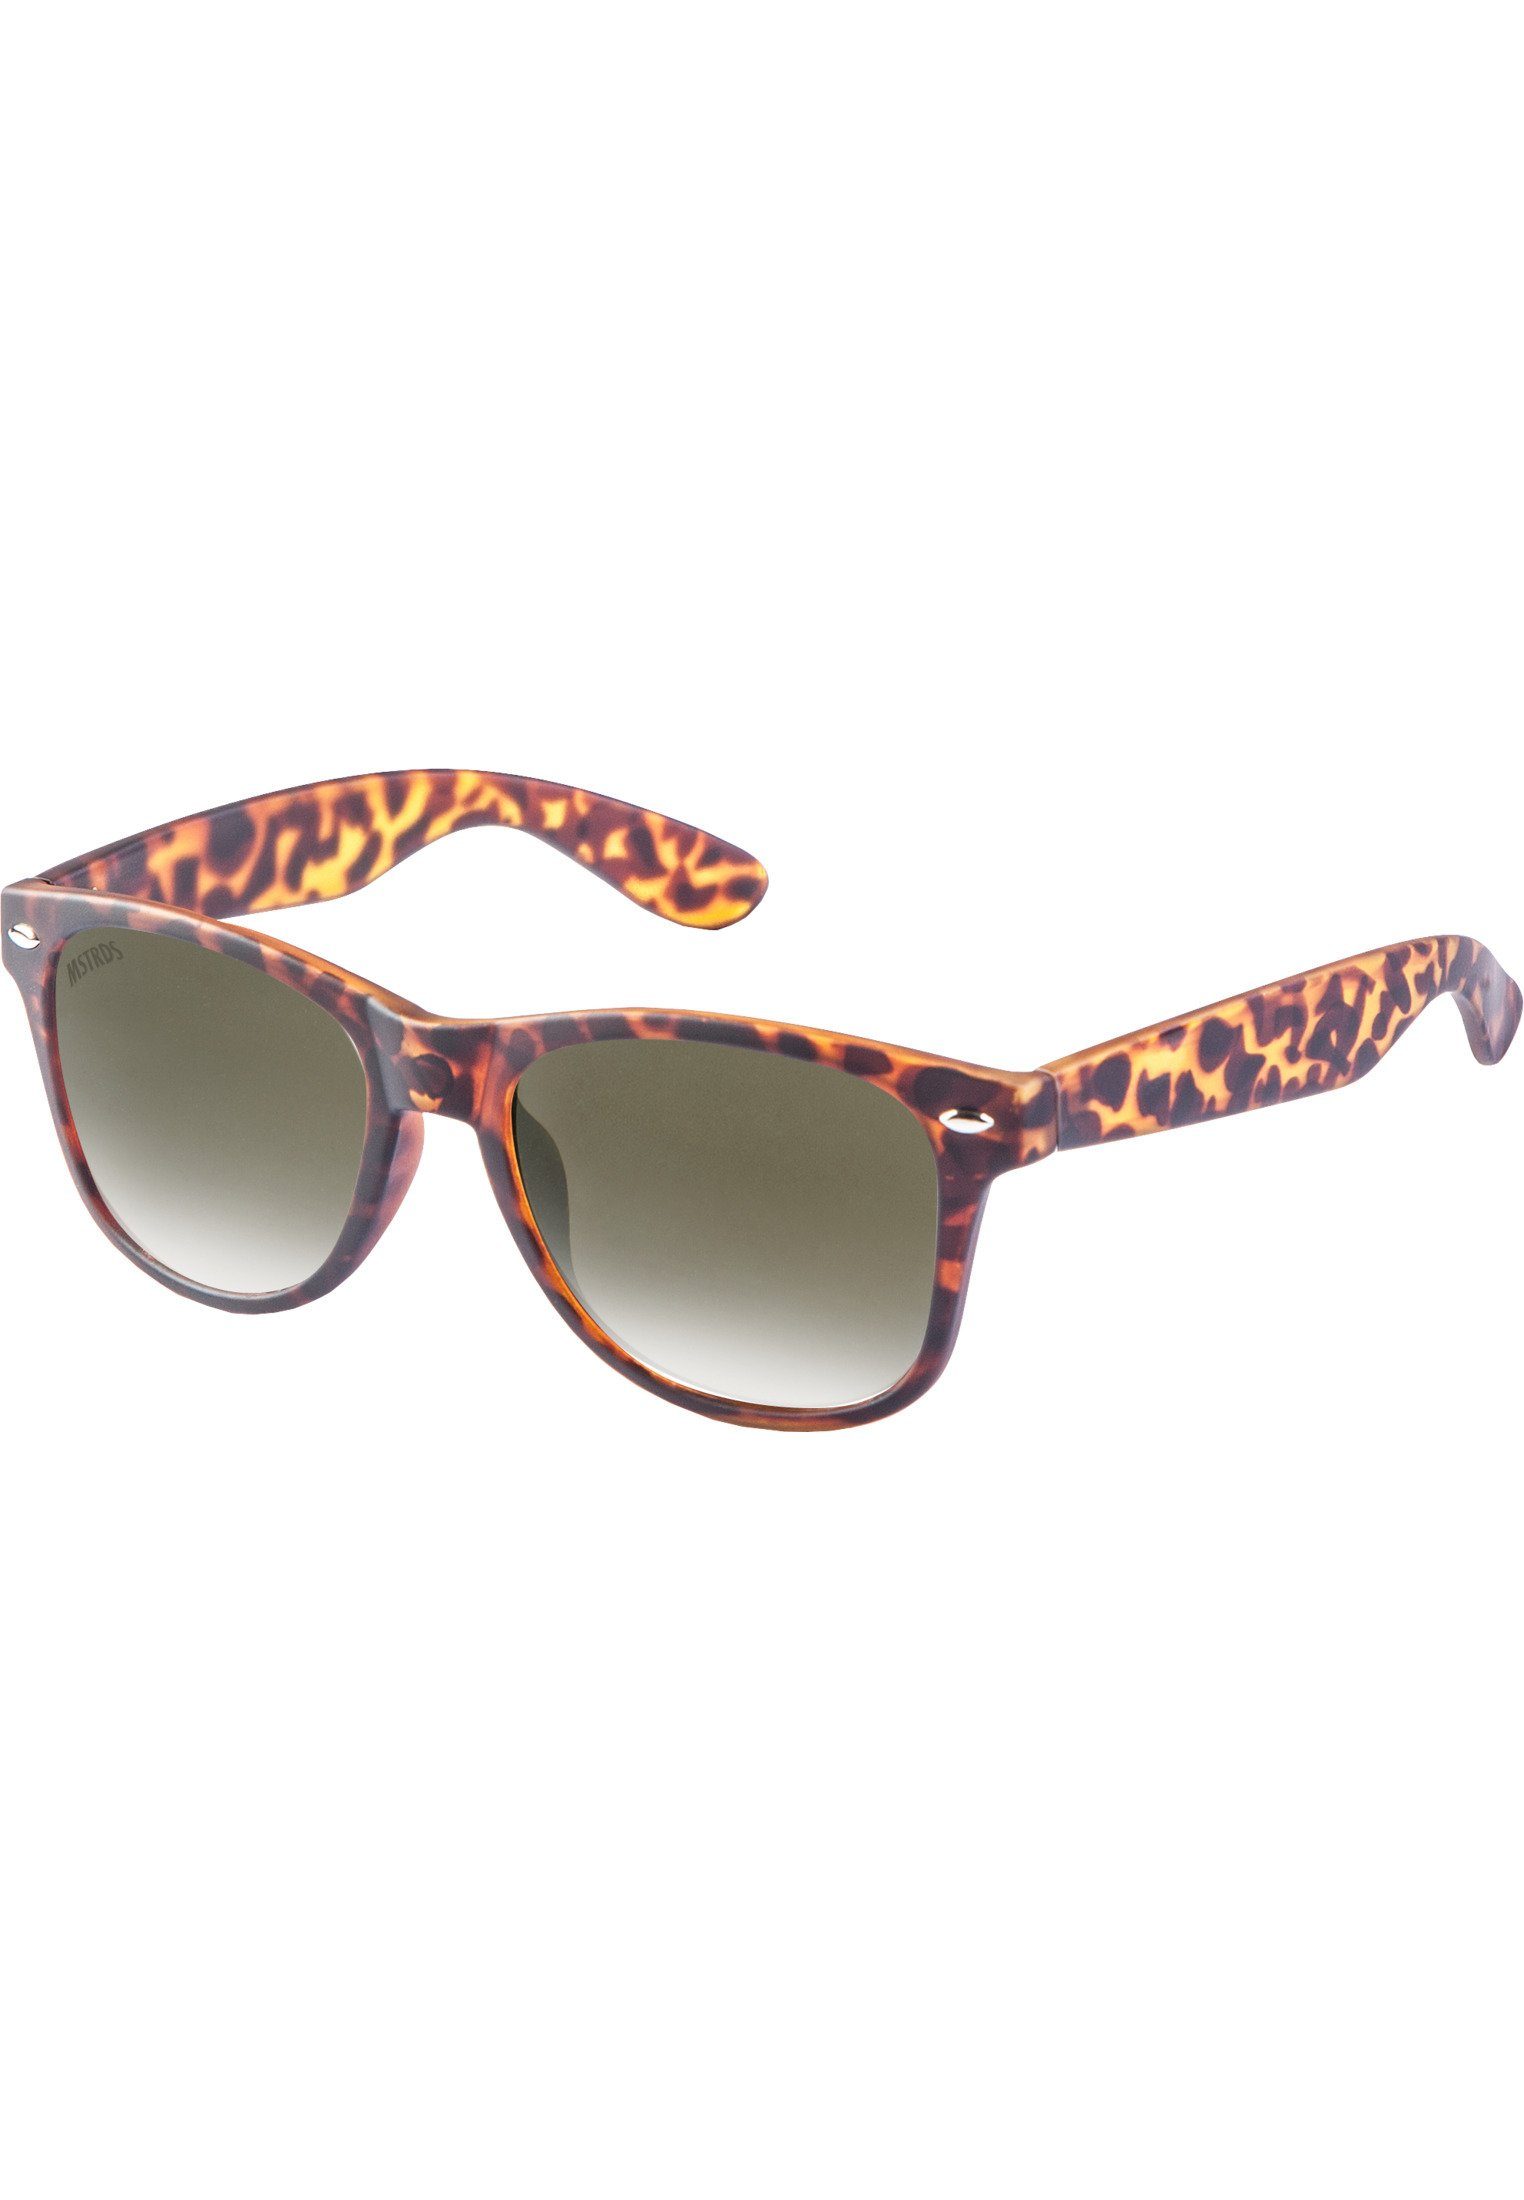 MSTRDS Sonnenbrille Accessoires havanna/brown Sunglasses Likoma Youth